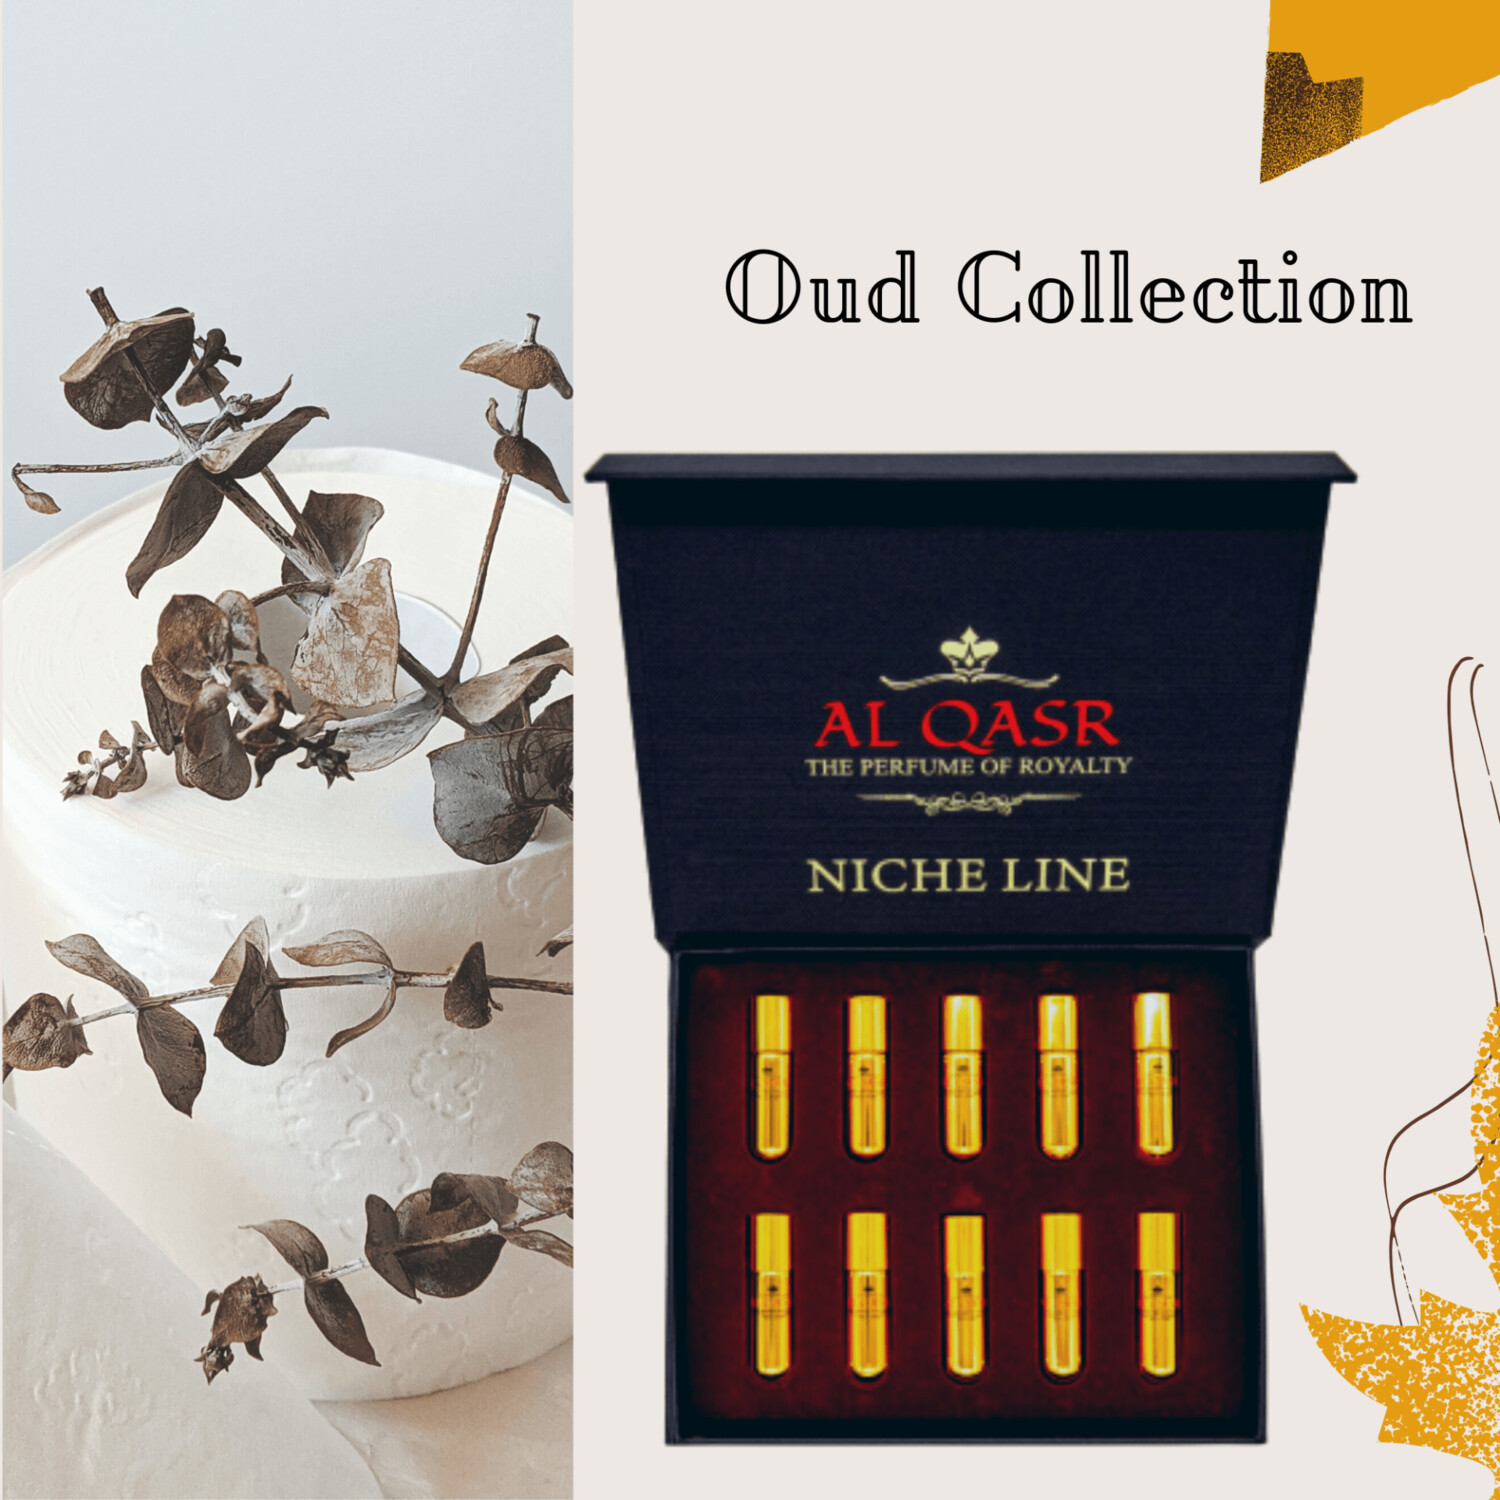 OUD COLLECTION